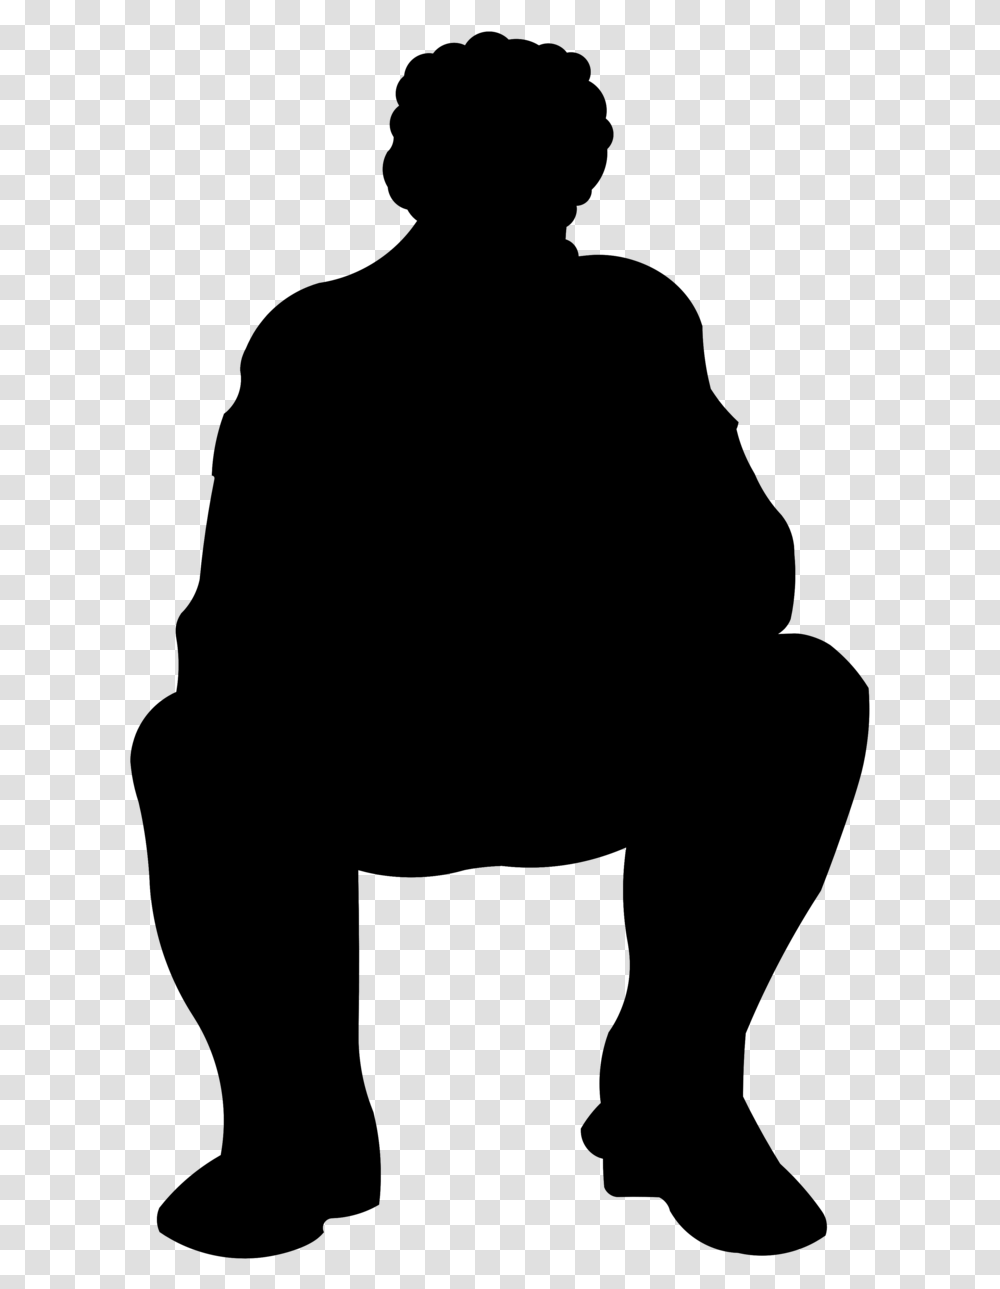 Silhouette Sitting Sitting Silhouette Man Sitting Sitting Silhouette Eating, Gray, World Of Warcraft Transparent Png